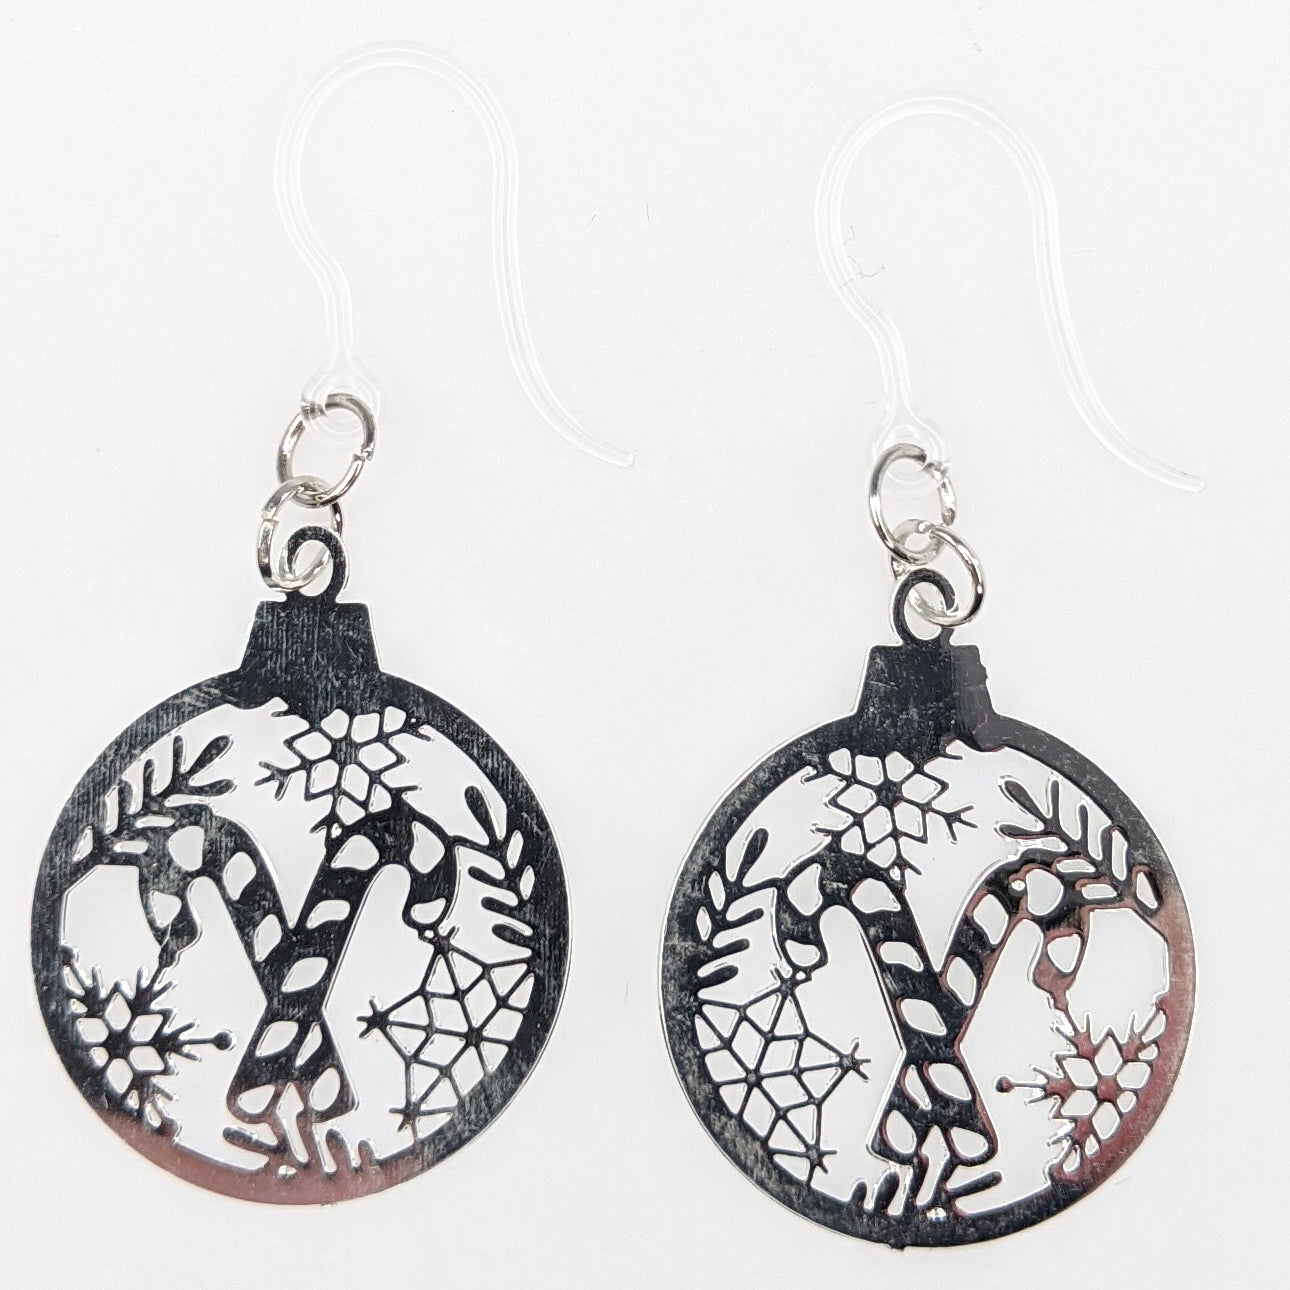 Candy Cane Ornament Earrings (Dangles) - silver